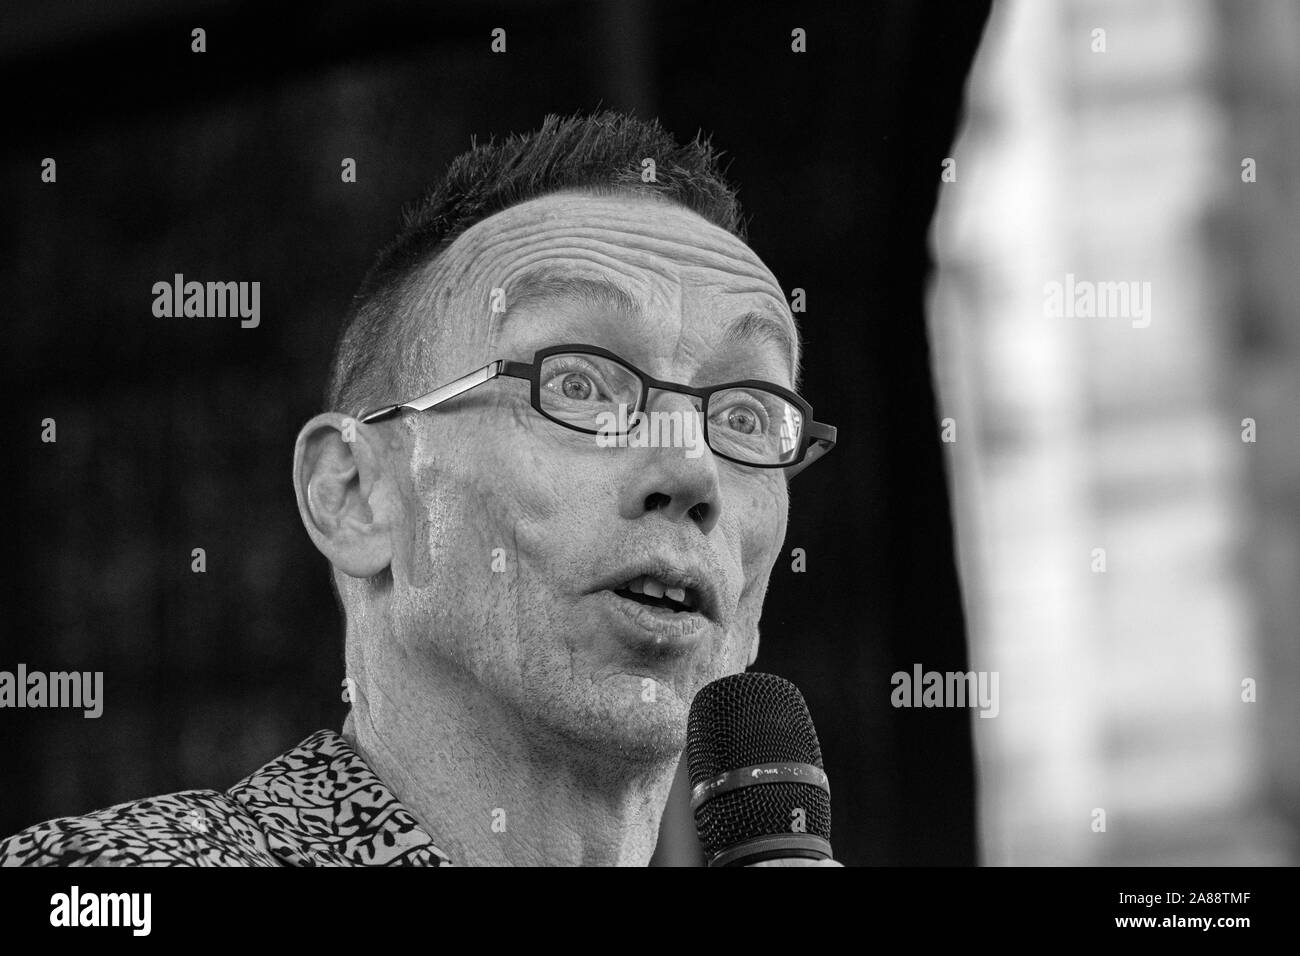 Close Up Dolf Jansen At The Edcuation Demonstration On The Dam The Netherlands 2019 In Black And White Stock Photo